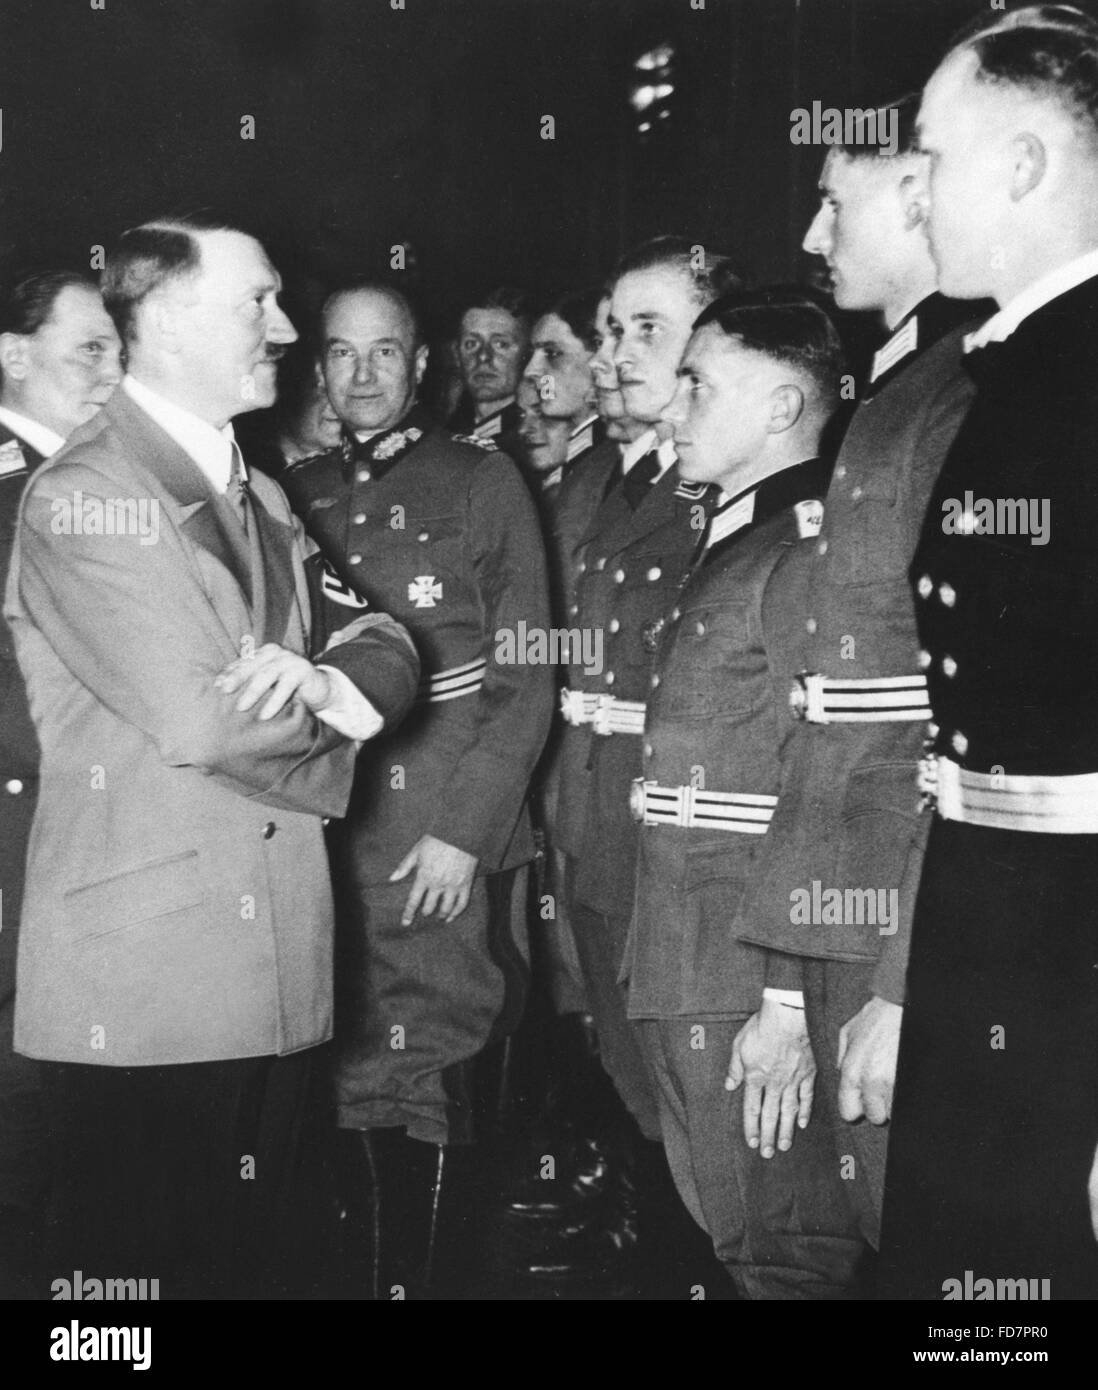 Graduates of the officer class 1938 are received by Adolf Hitler, 1939 Stock Photo